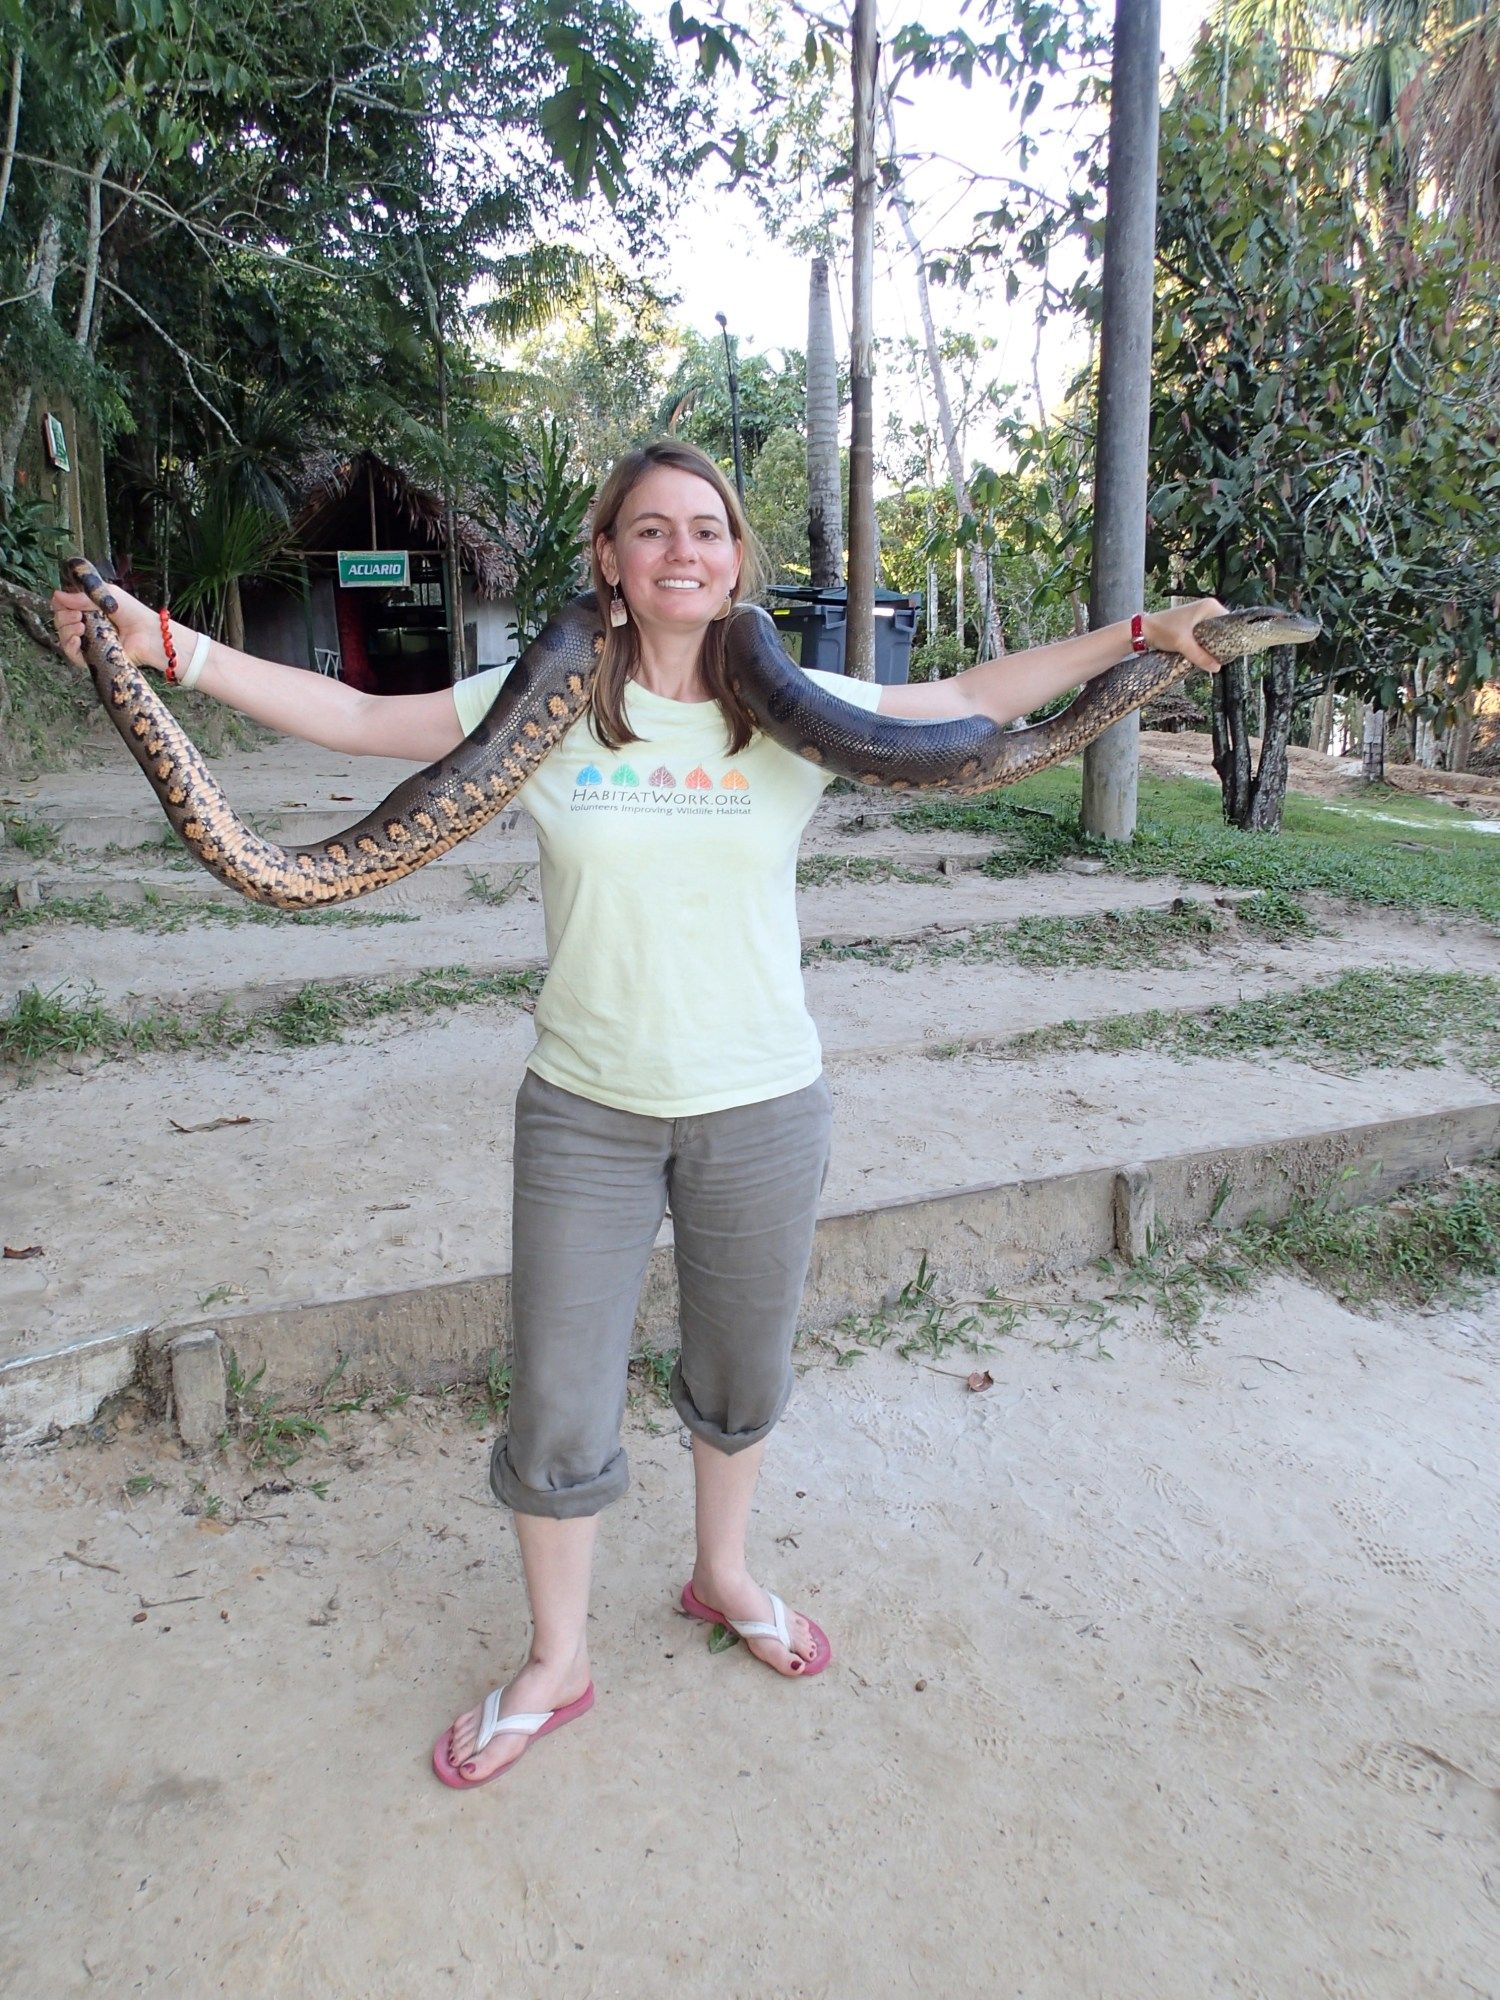 Posing with an Anaconda in the Peruvian Amazon. Credit: Erika Podest